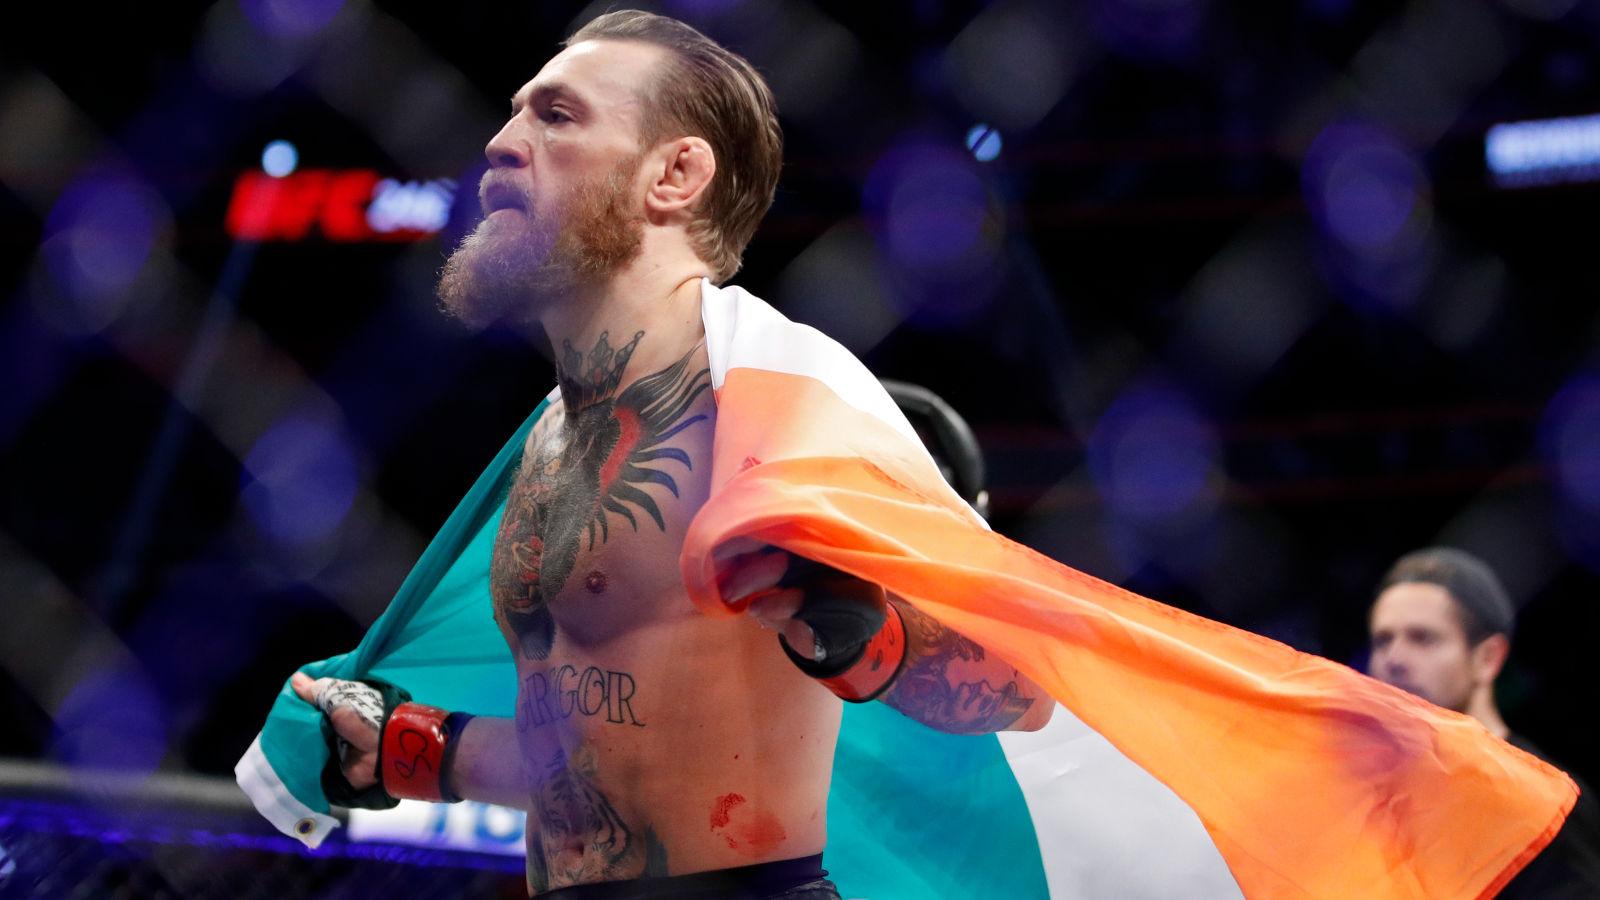 Conor McGregor drapes an Irish flag around his shoulders in the Octagon